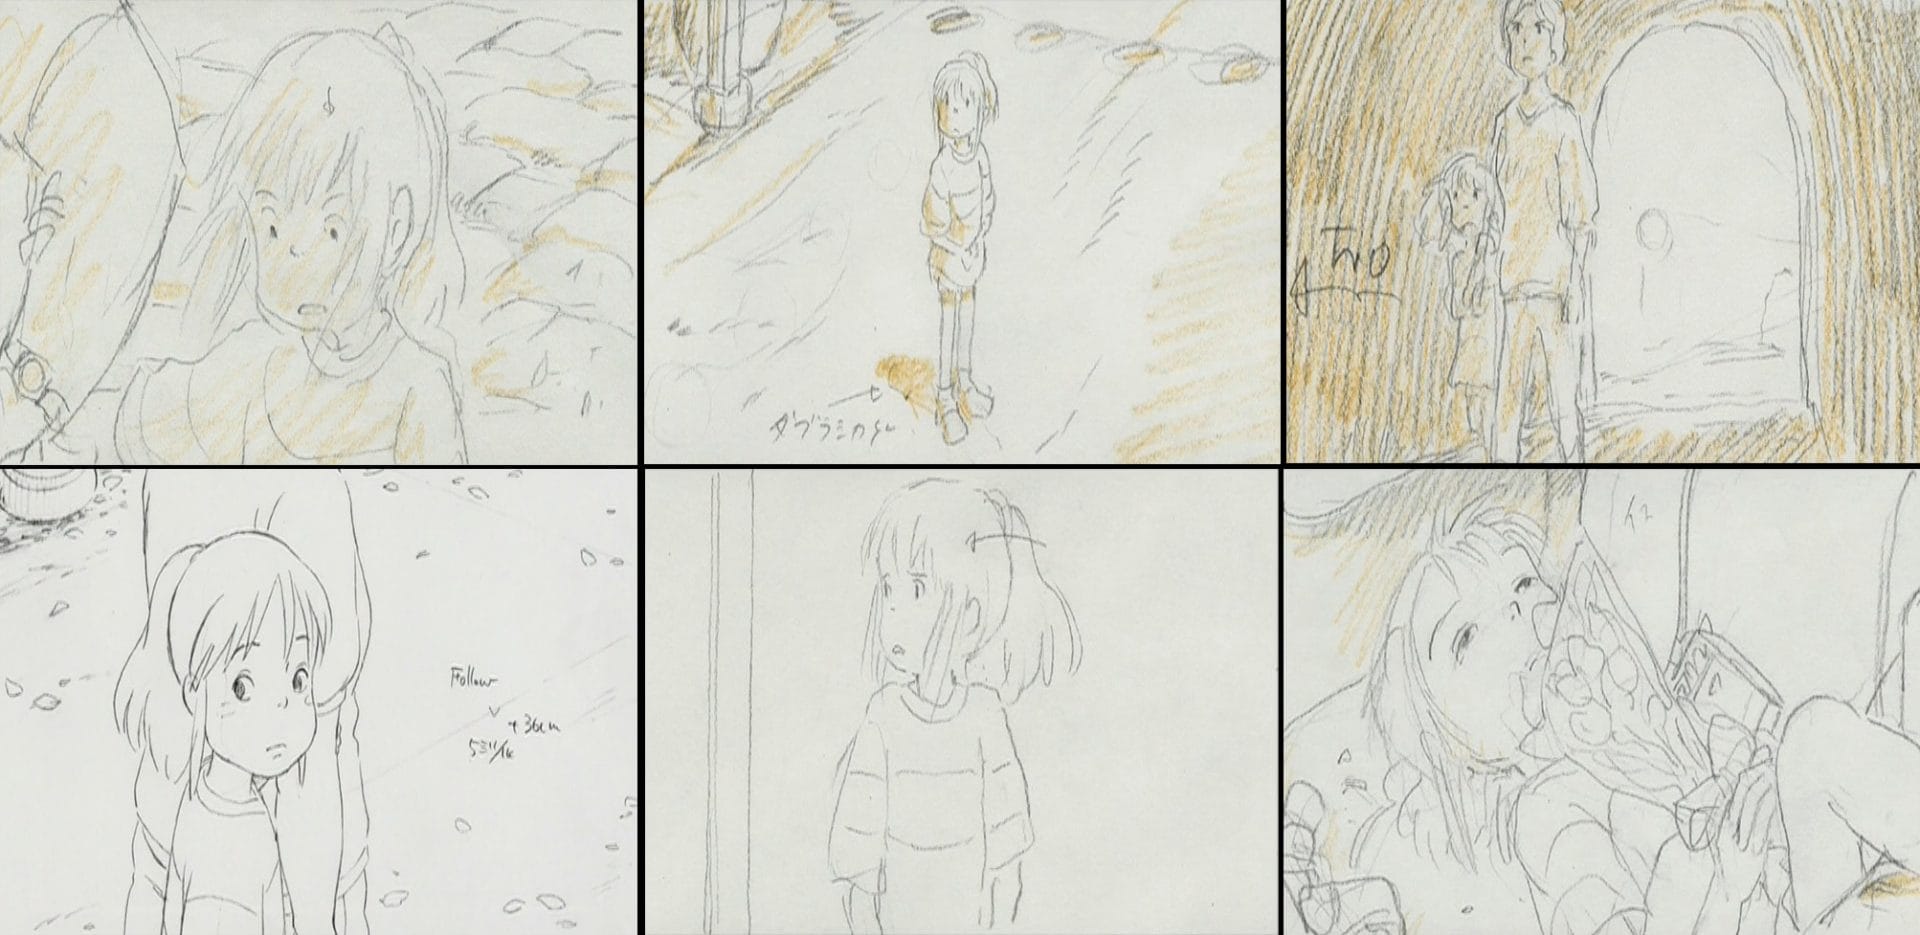 A storyboard of a scene in Spirited Away (2001)